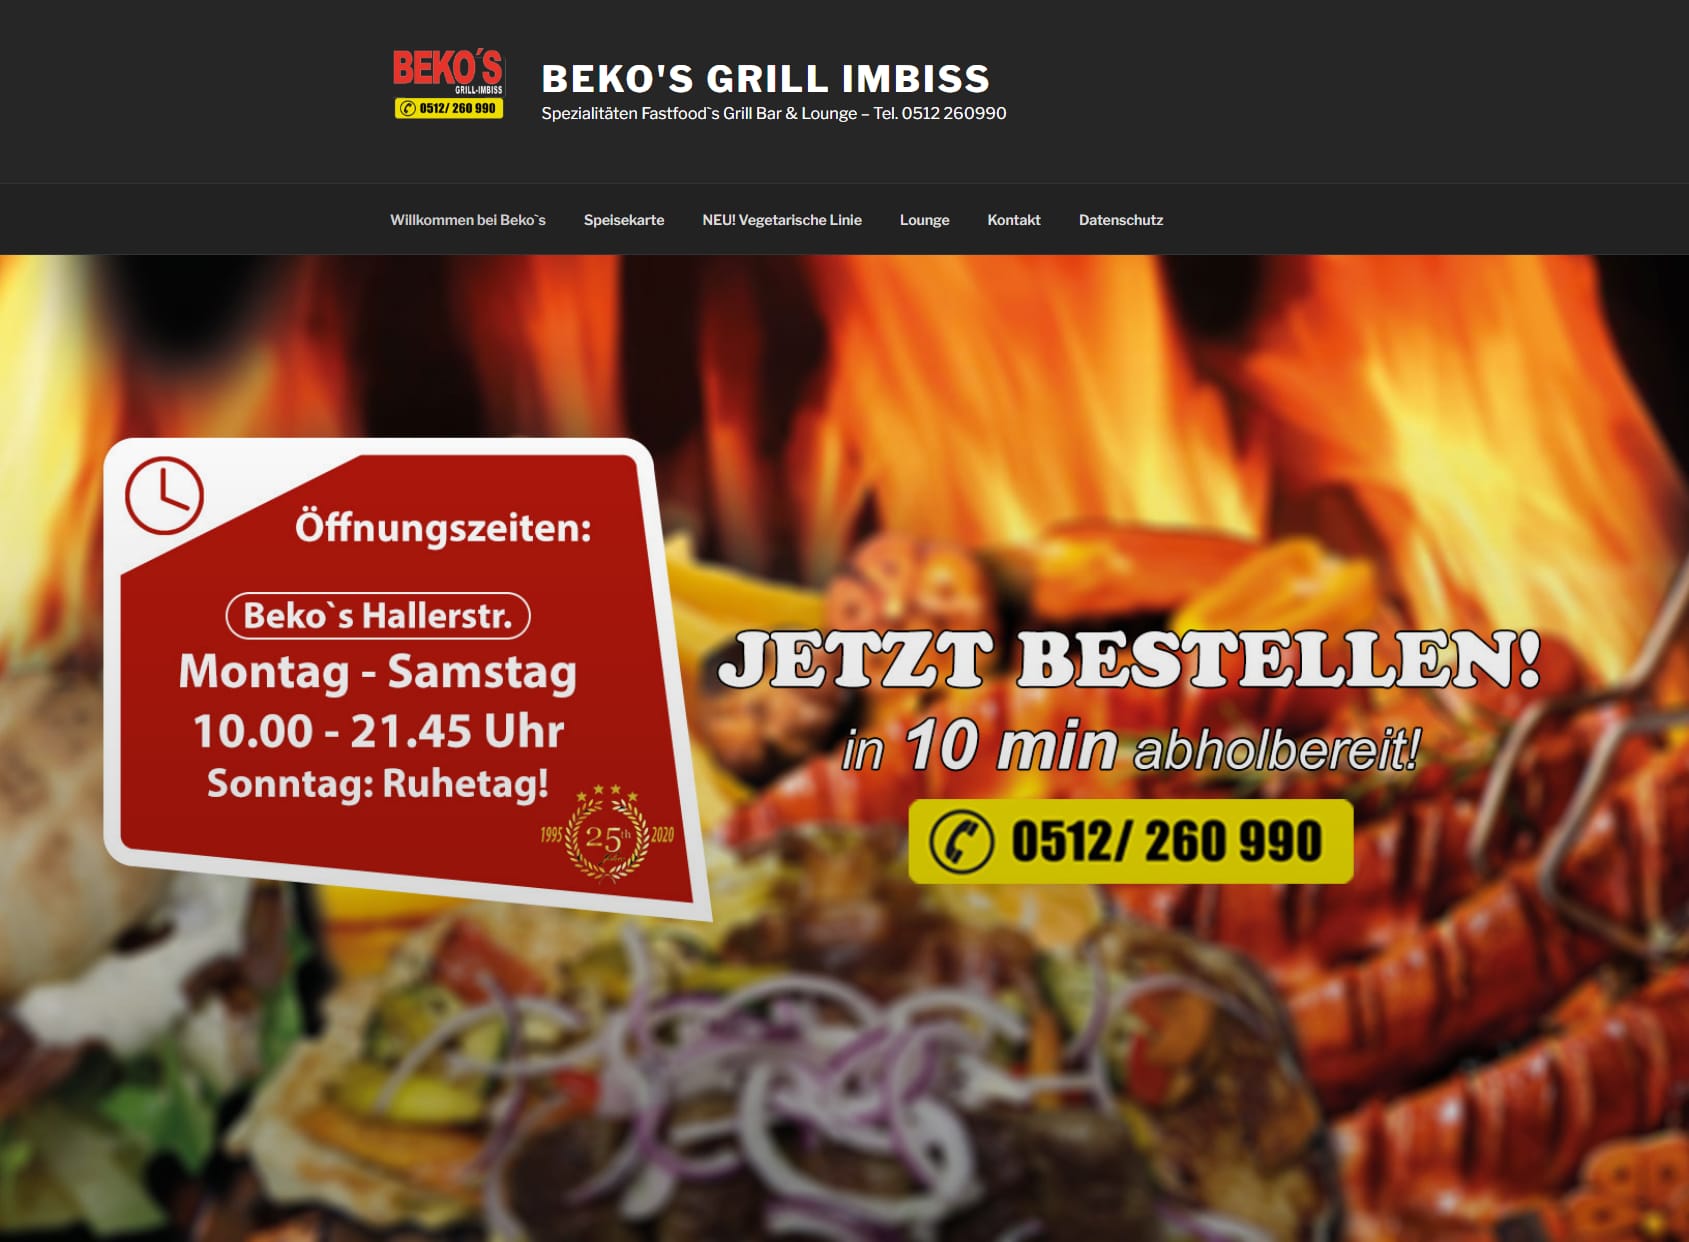 Beko's Grill-Imbiss